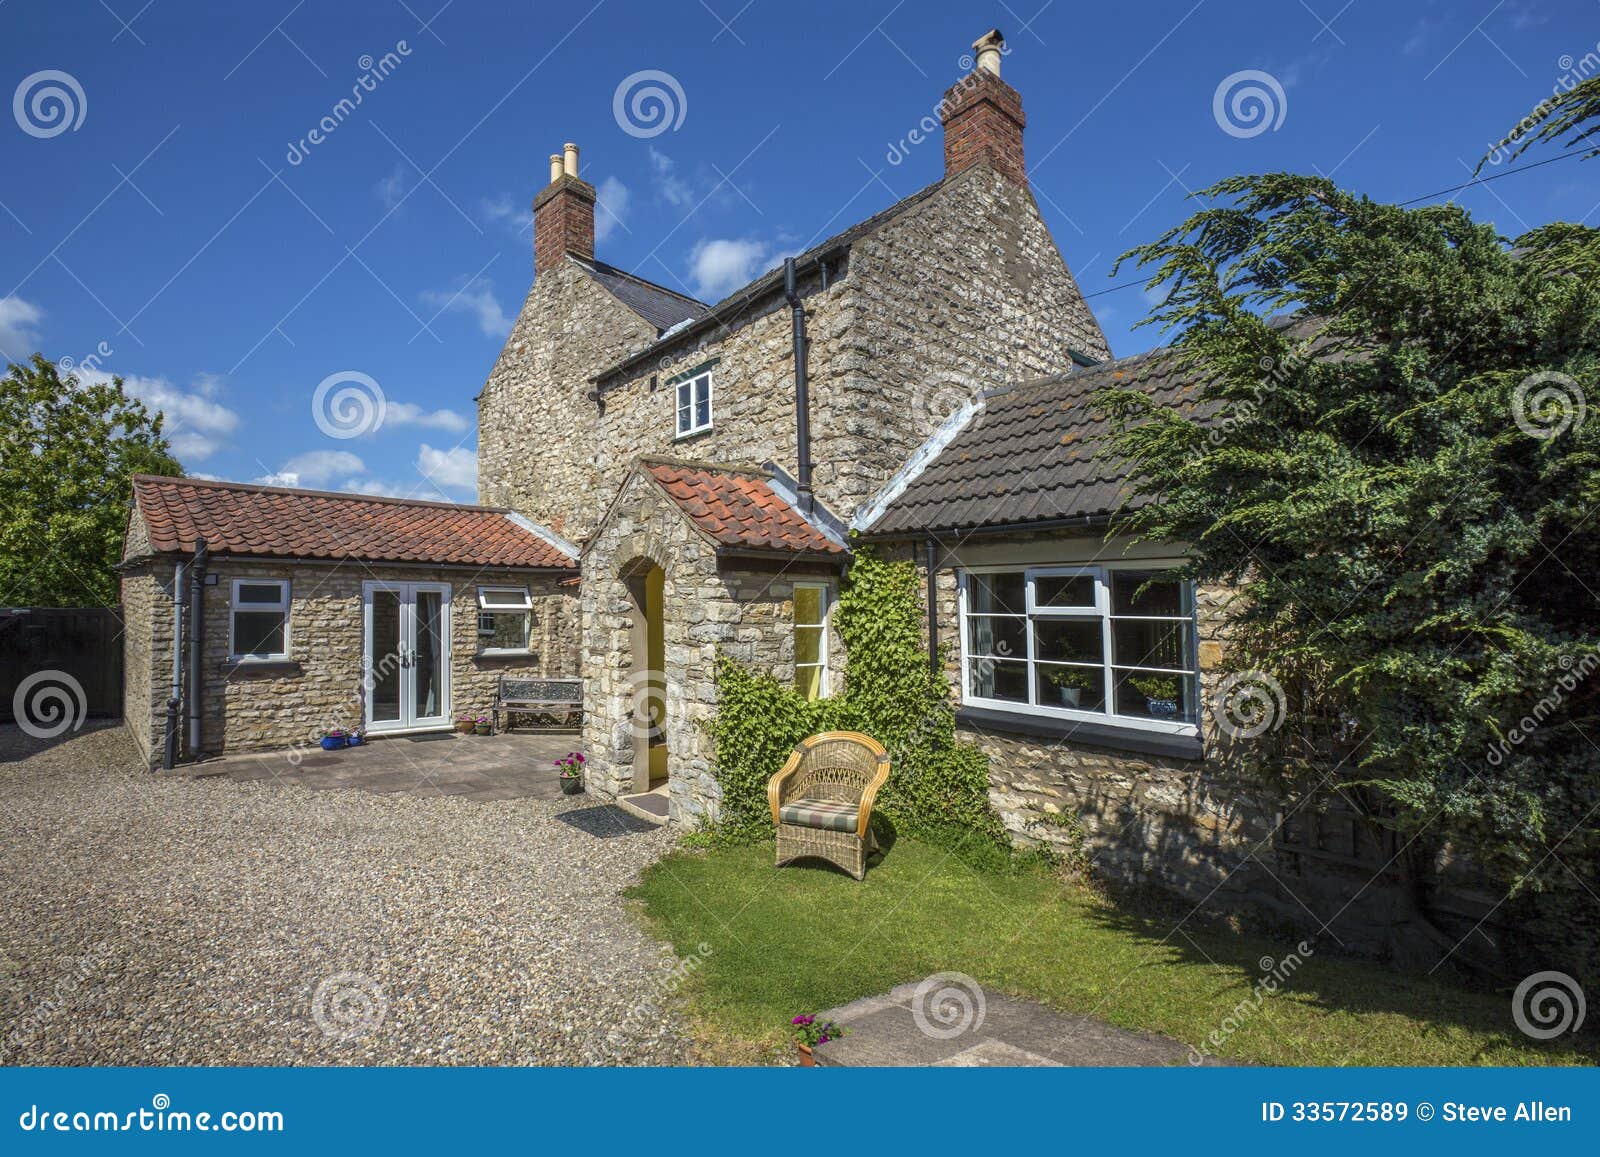 period property - yorkshire - england